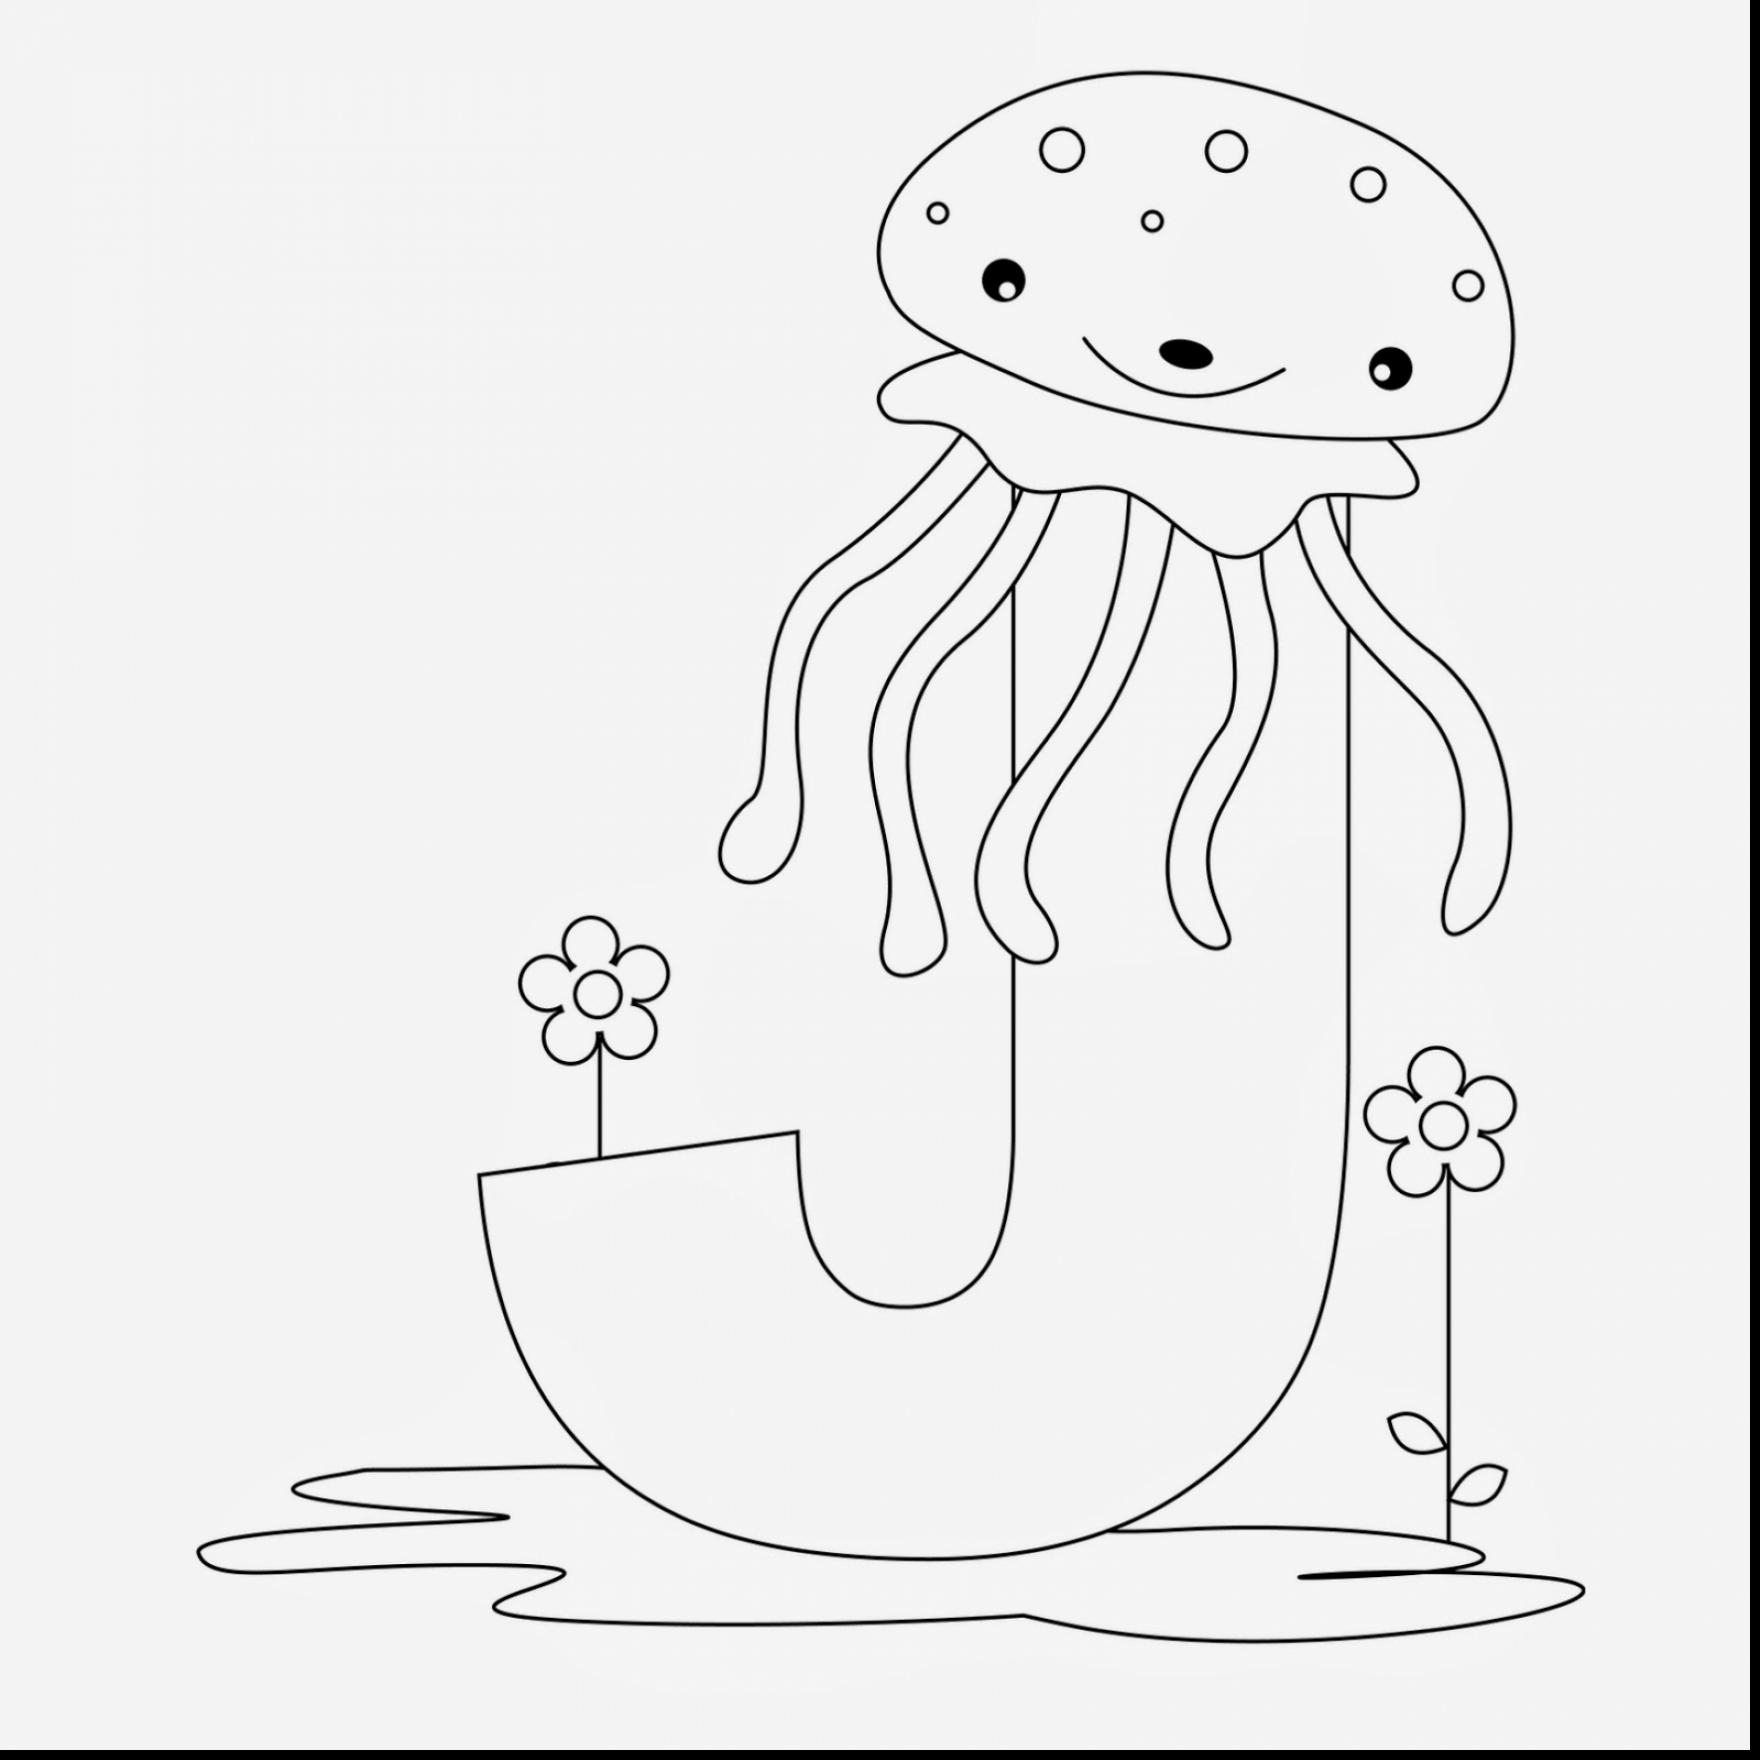 Letter C Coloring Pages For Preschoolers Alphabet Coloring Pages For Ba Shower Tags Coloring Pages For